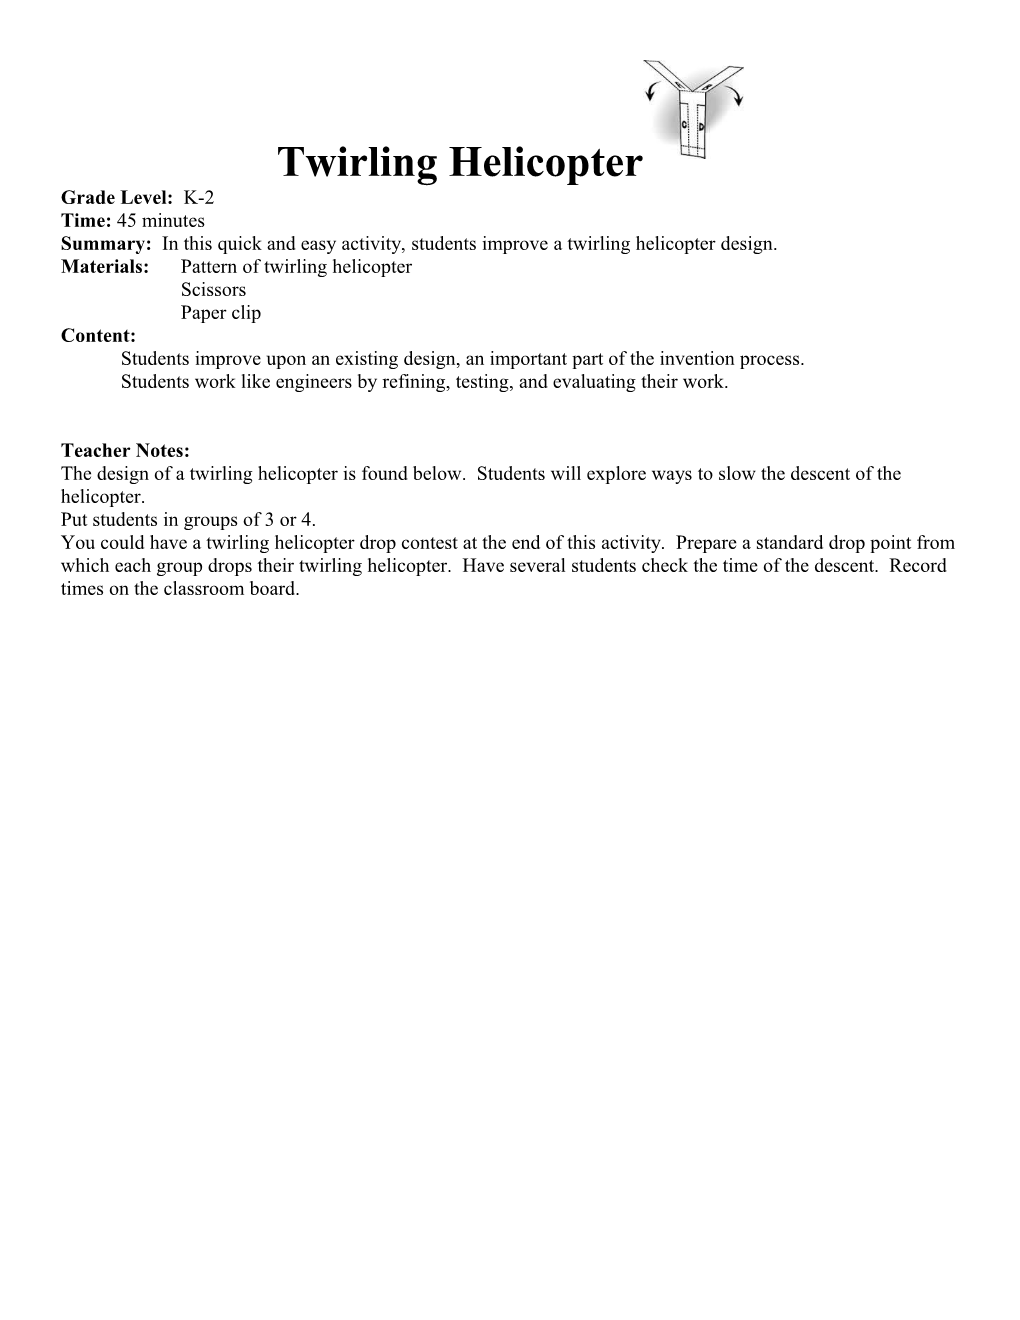 Summary: in This Quick and Easy Activity, Students Improve a Twirling Helicopter Design